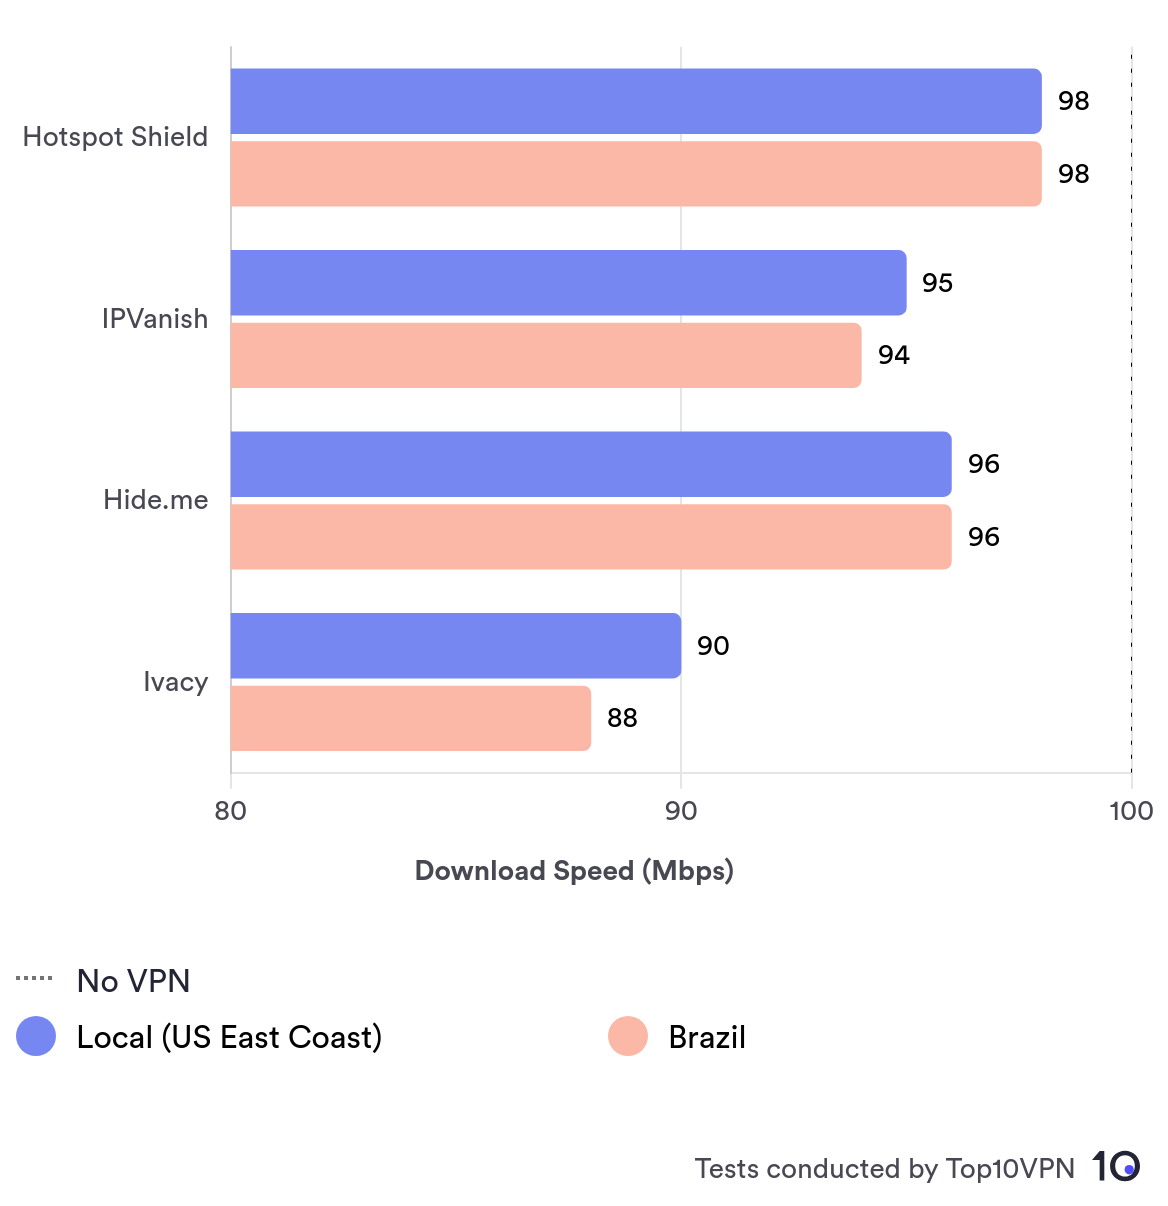 Bar chart comparing local and international speeds between Hotspot Shield, IPVanish, Hide.me, and Ivacy. 